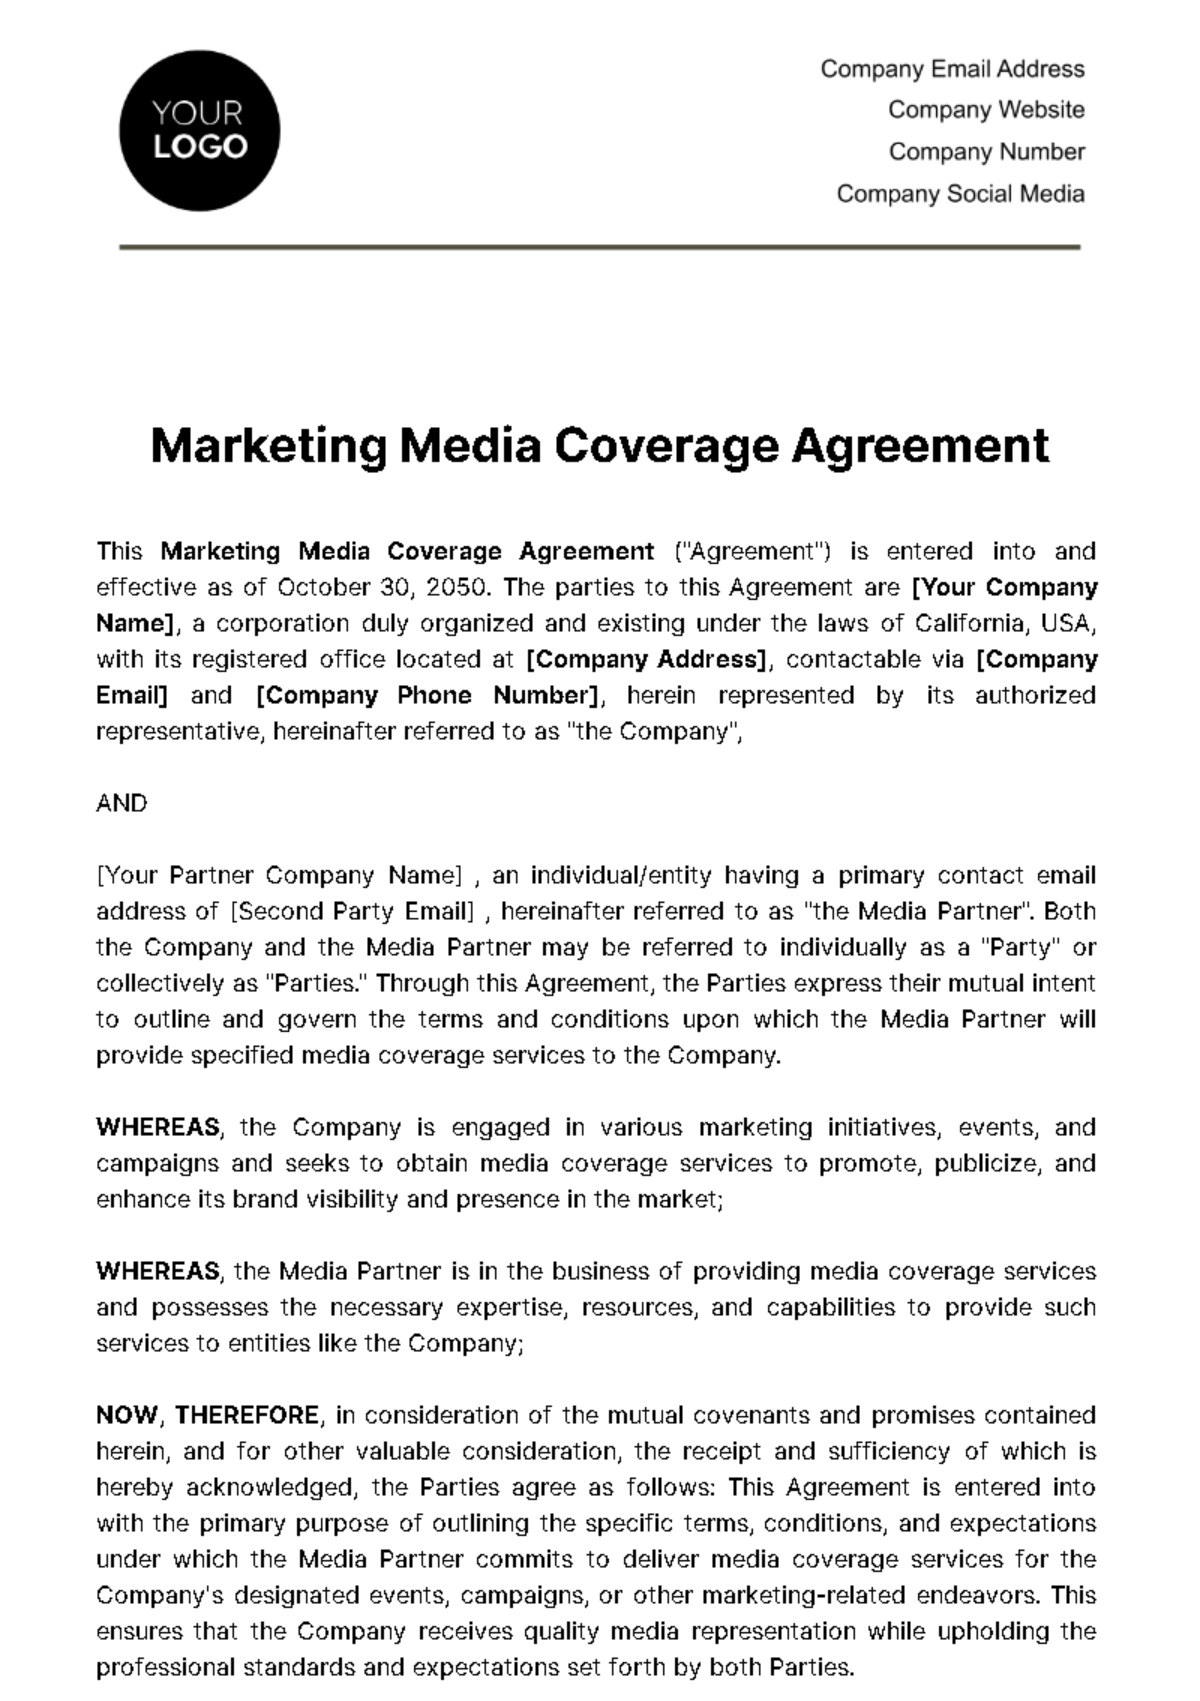 Free Marketing Media Coverage Agreement Template